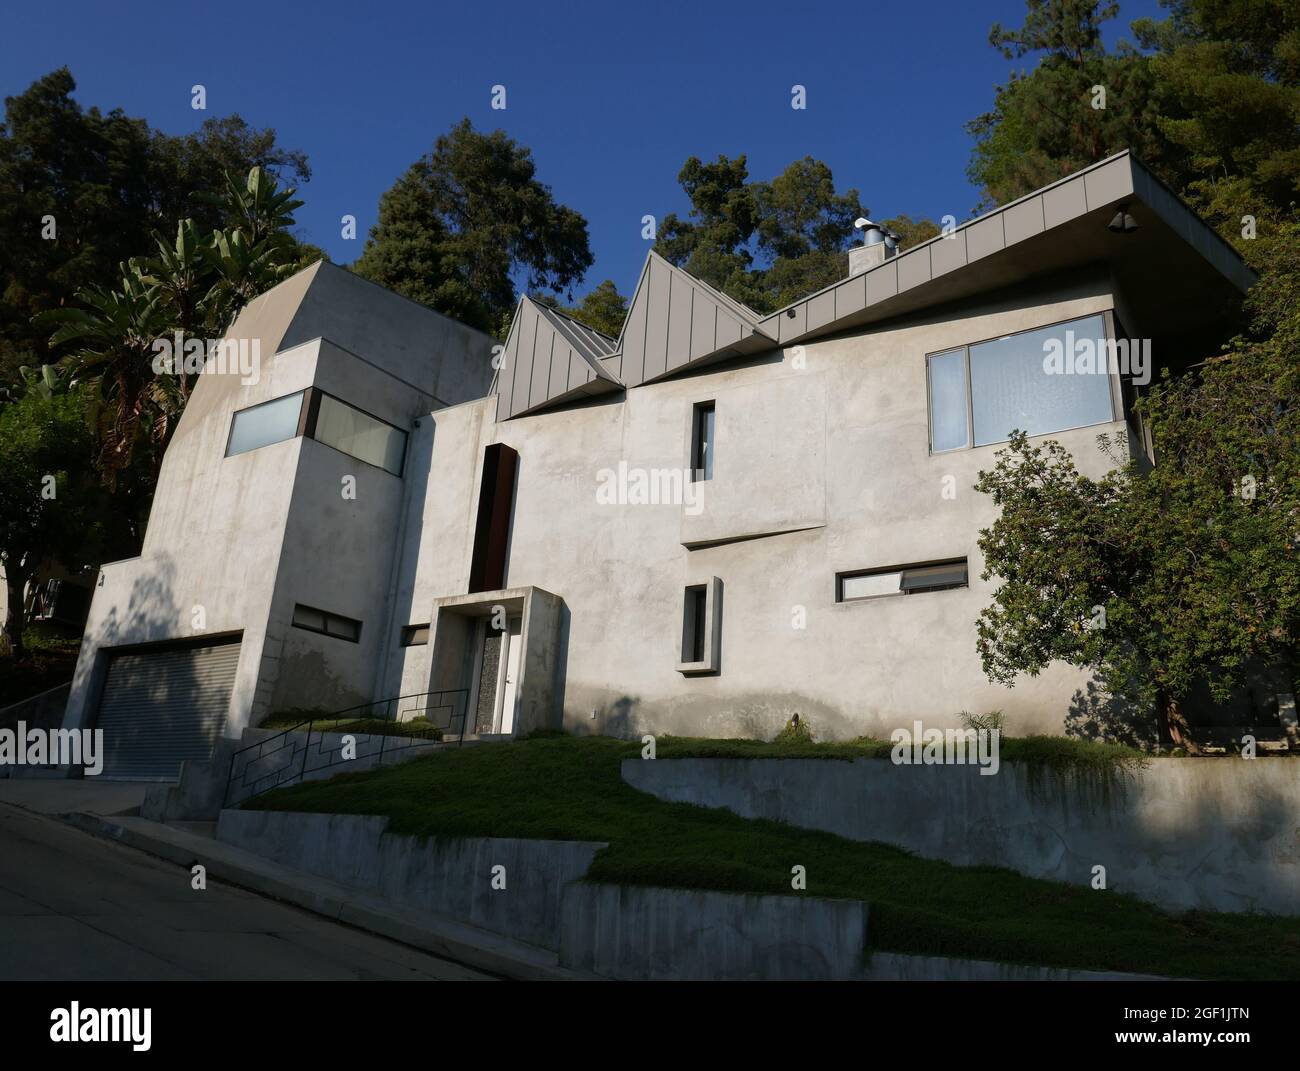 Los Angeles, California, USA 21st August 2021 A general view of atmosphere director David Lynch's home/house on August 21, 2021 in Los Angeles, California, USA. Photo by Barry King/Alamy Stock Photo Stock Photo